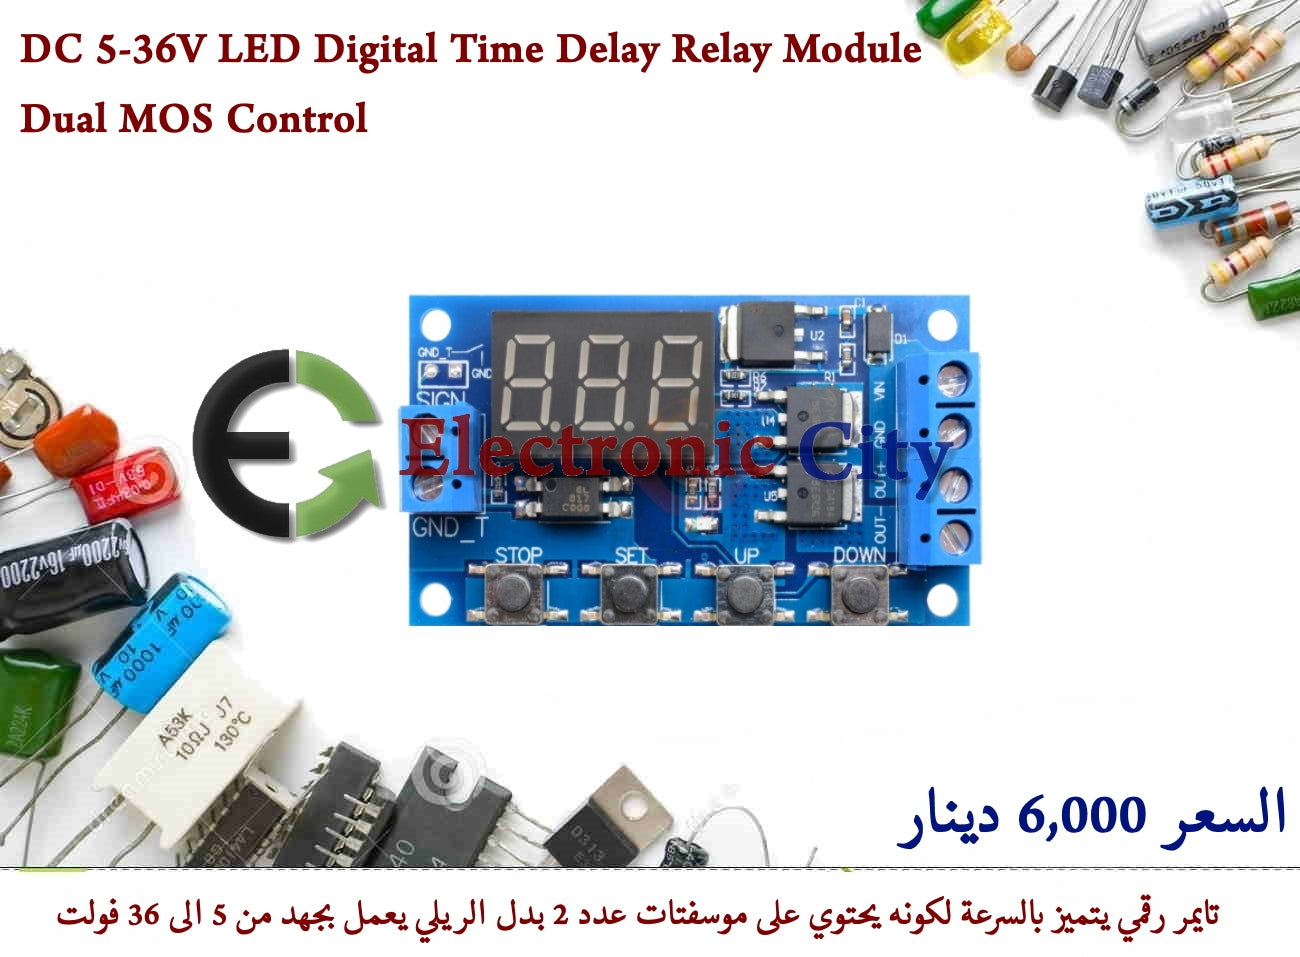 DC 5-36V LED Digital Time Delay Relay Module Dual MOS Control continuous current 15A And the maximum up to 30A.  #M7 11307